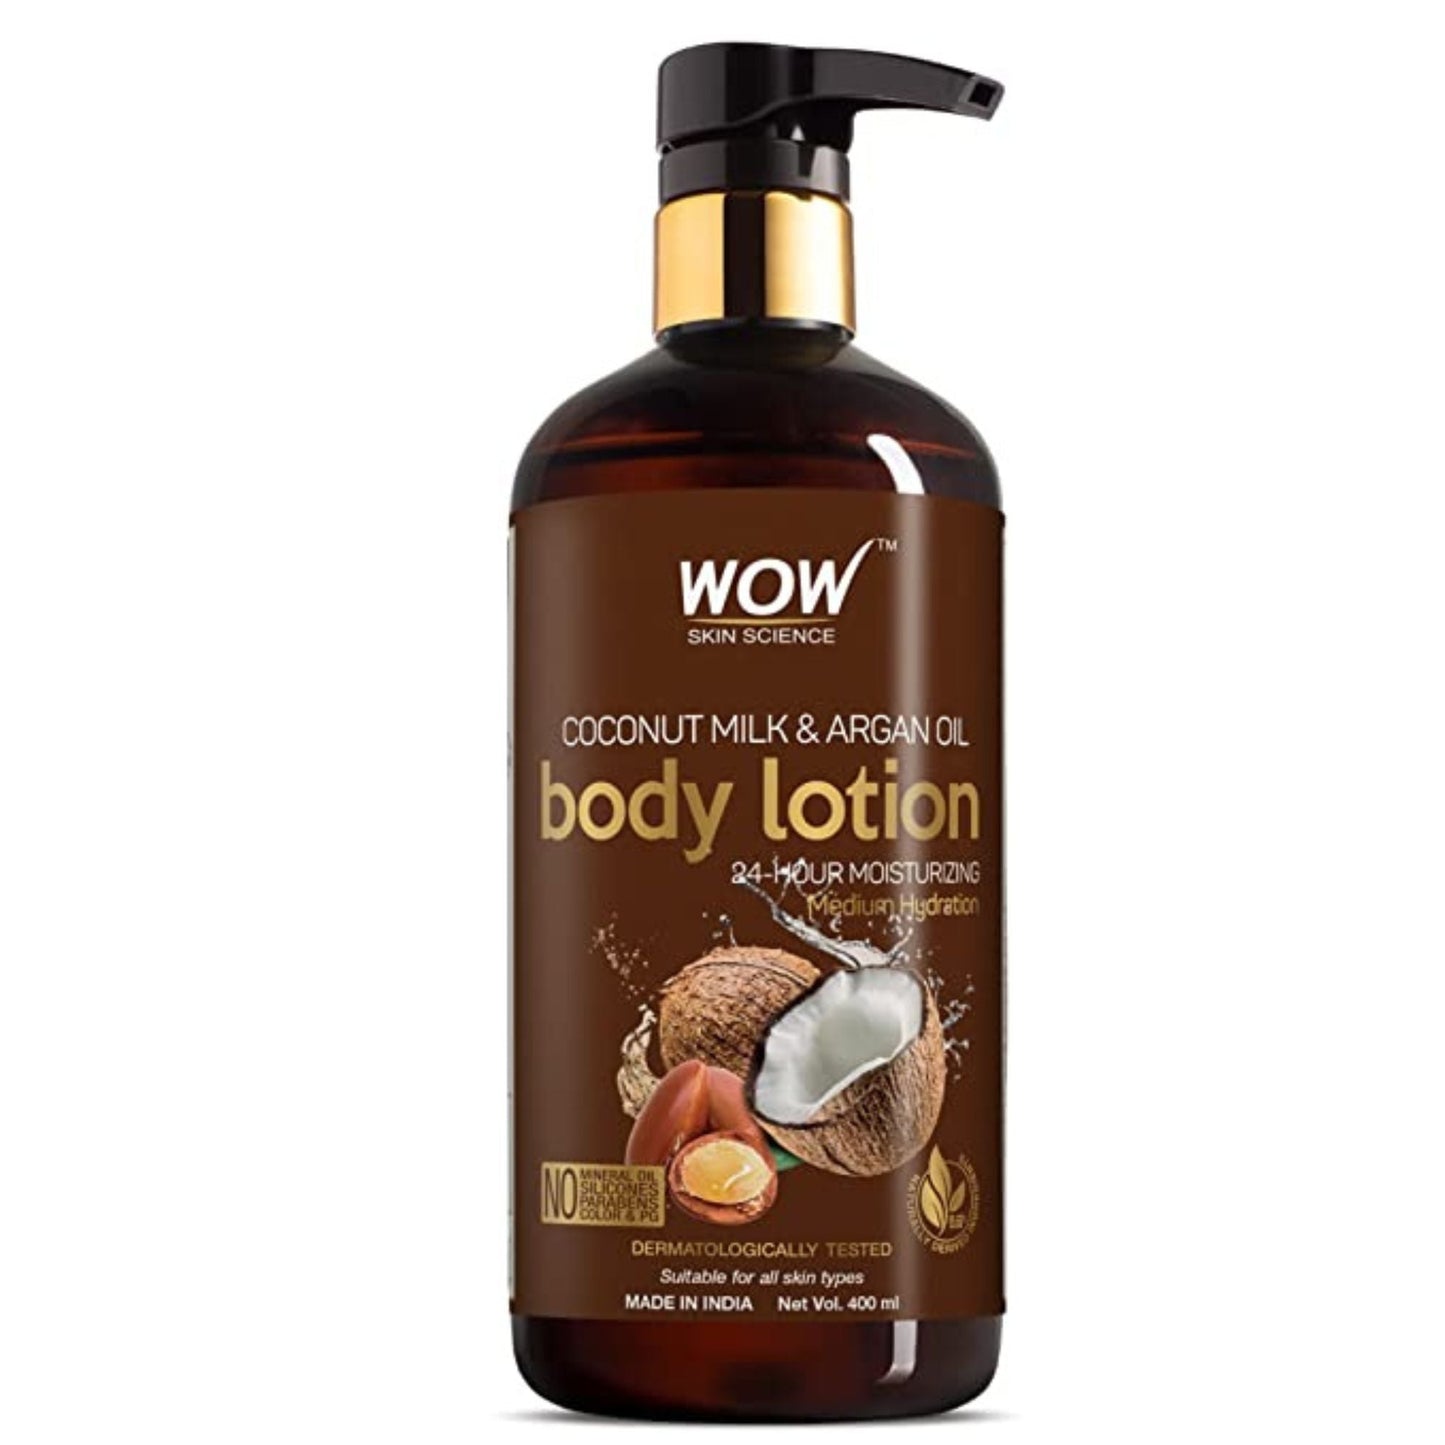 WOW Skin Science Coconut Milk & Argan Oil Body Lotion - Medium Hydration - No Mineral Oil, Parabens, Silicones, Color & PG